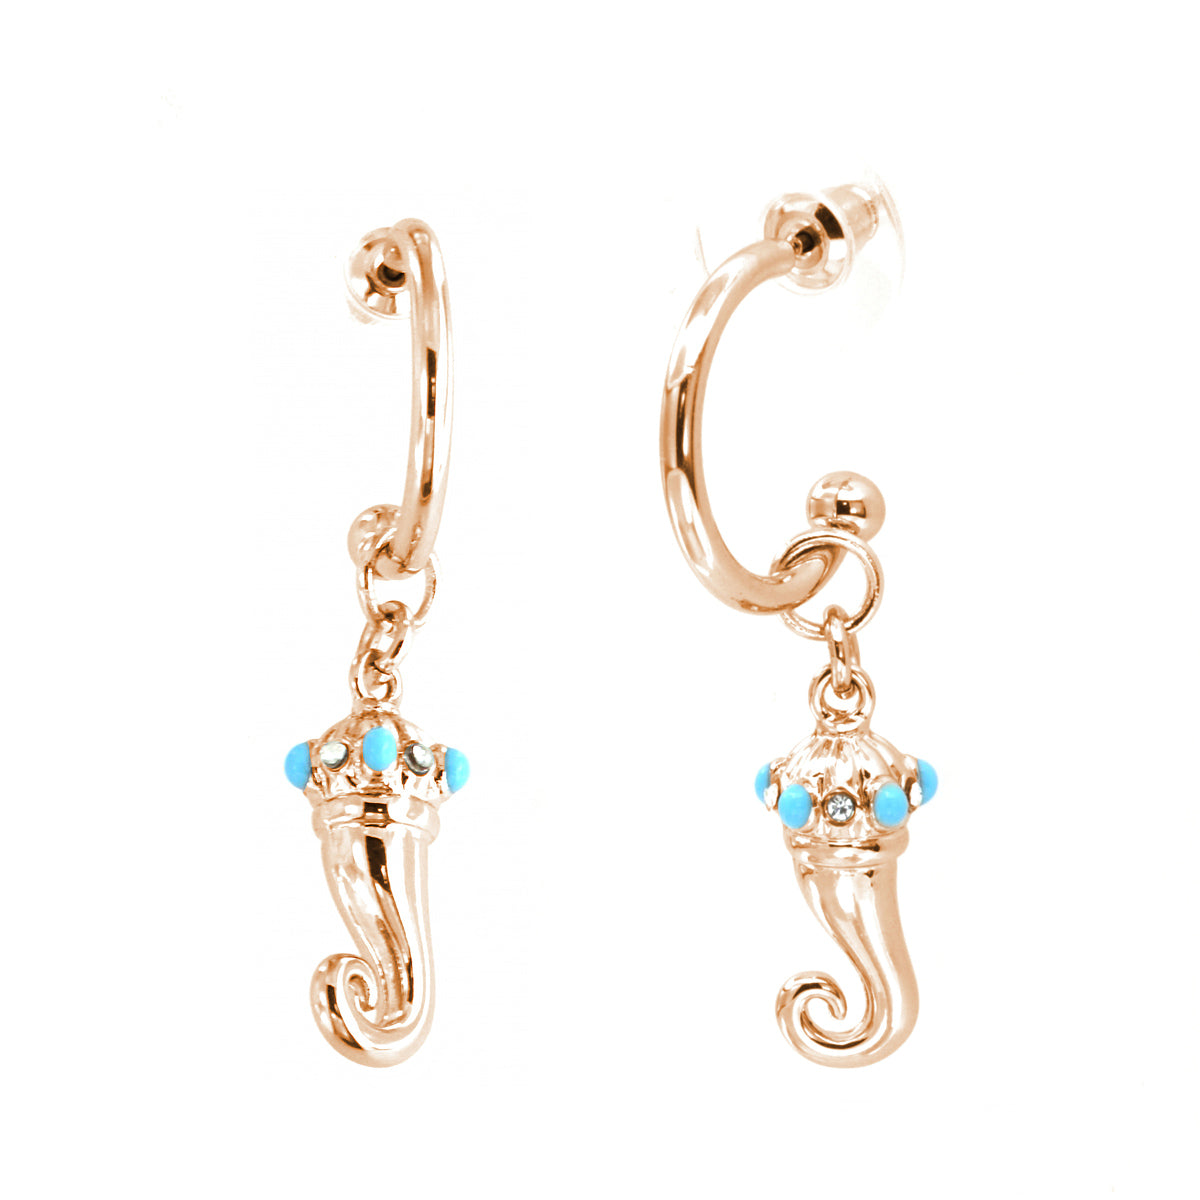 Metal earrings circle with a pending croissant embellished with turquoise nail polish points